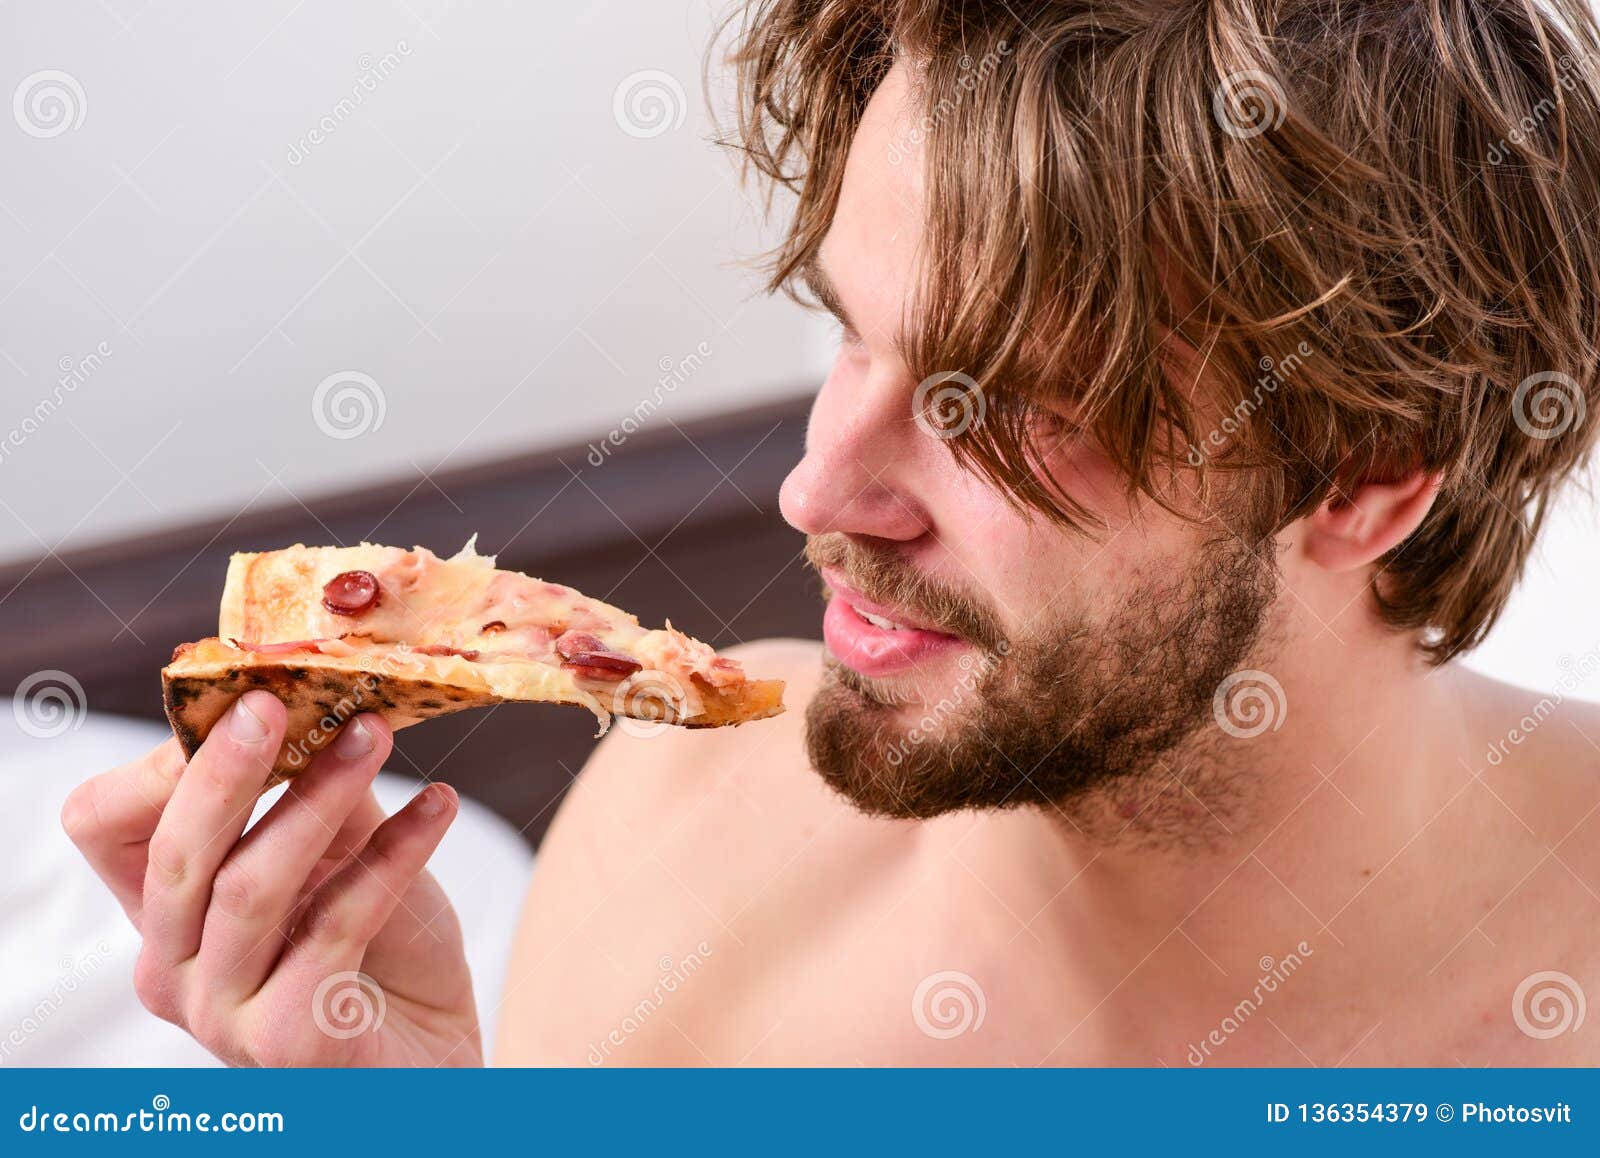 Nudes pizza for Pizza Pics